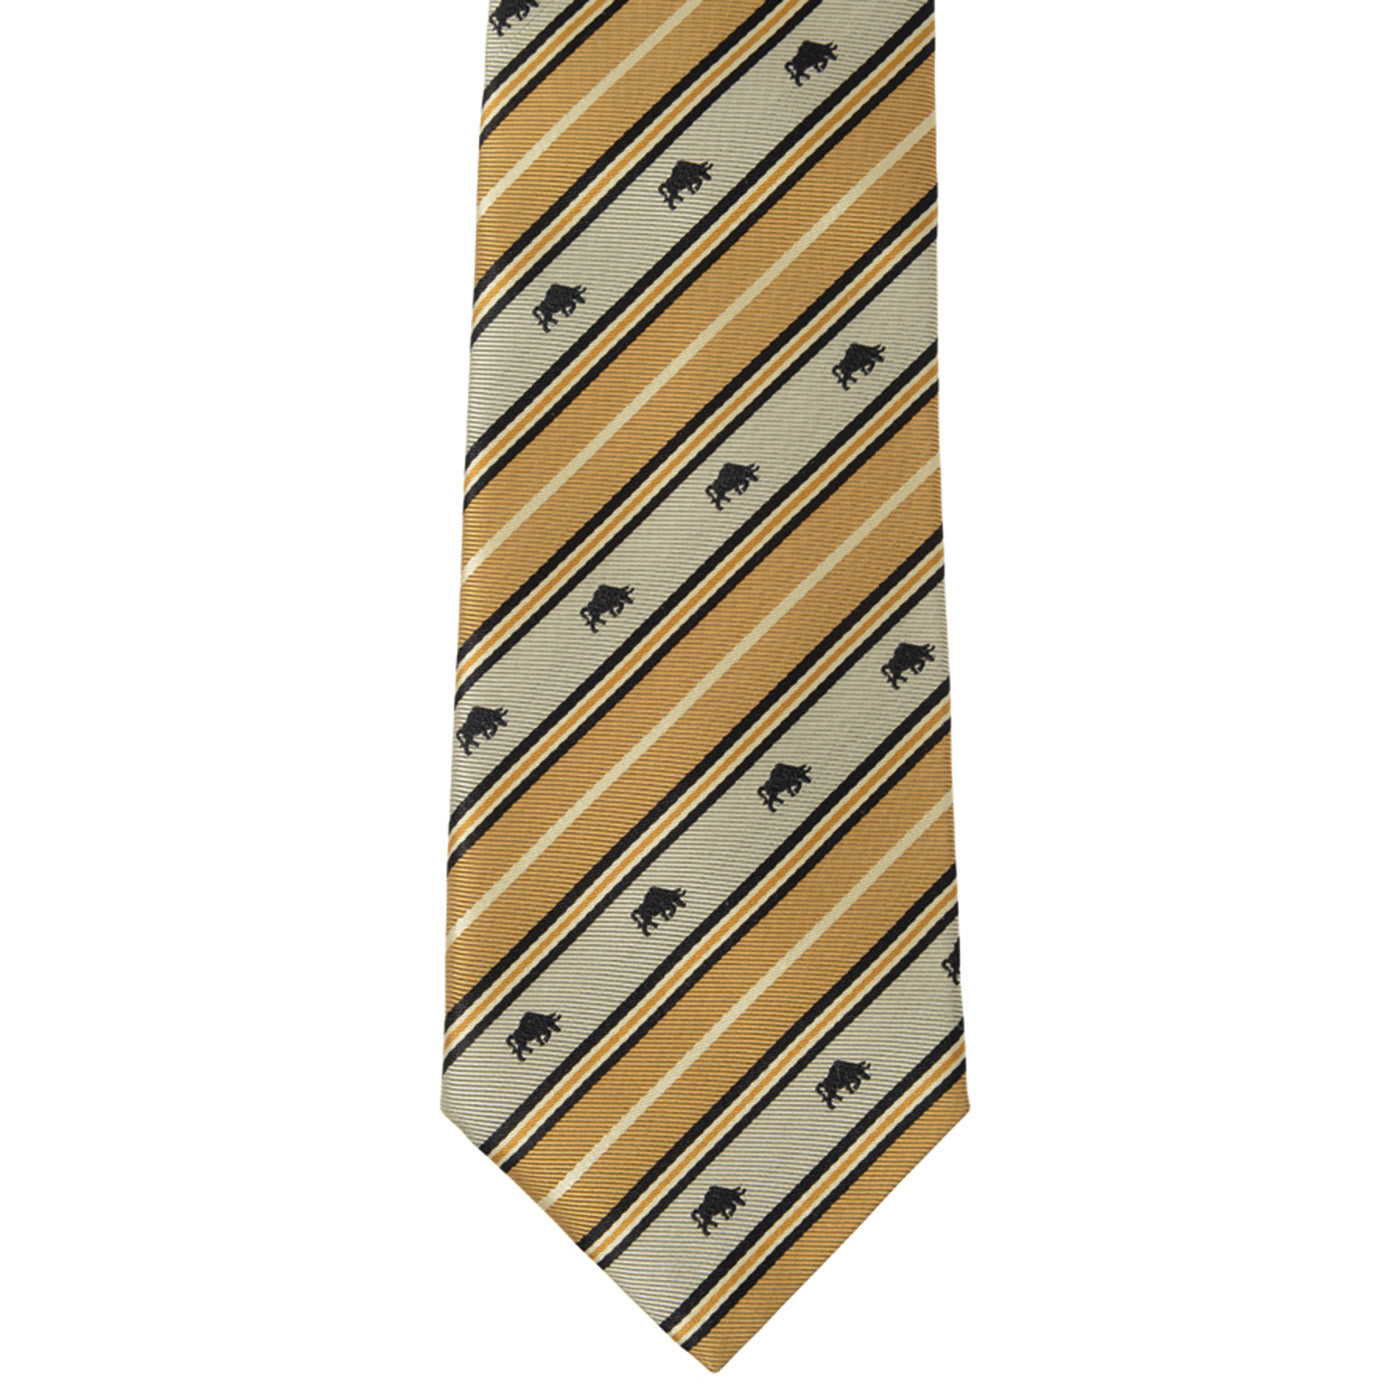 Men’s Jacquard Woven 100% Kyoto Silk Tie -17. Success Charging Bull Striped Pattern Made in Japan FORTUNA Tokyo